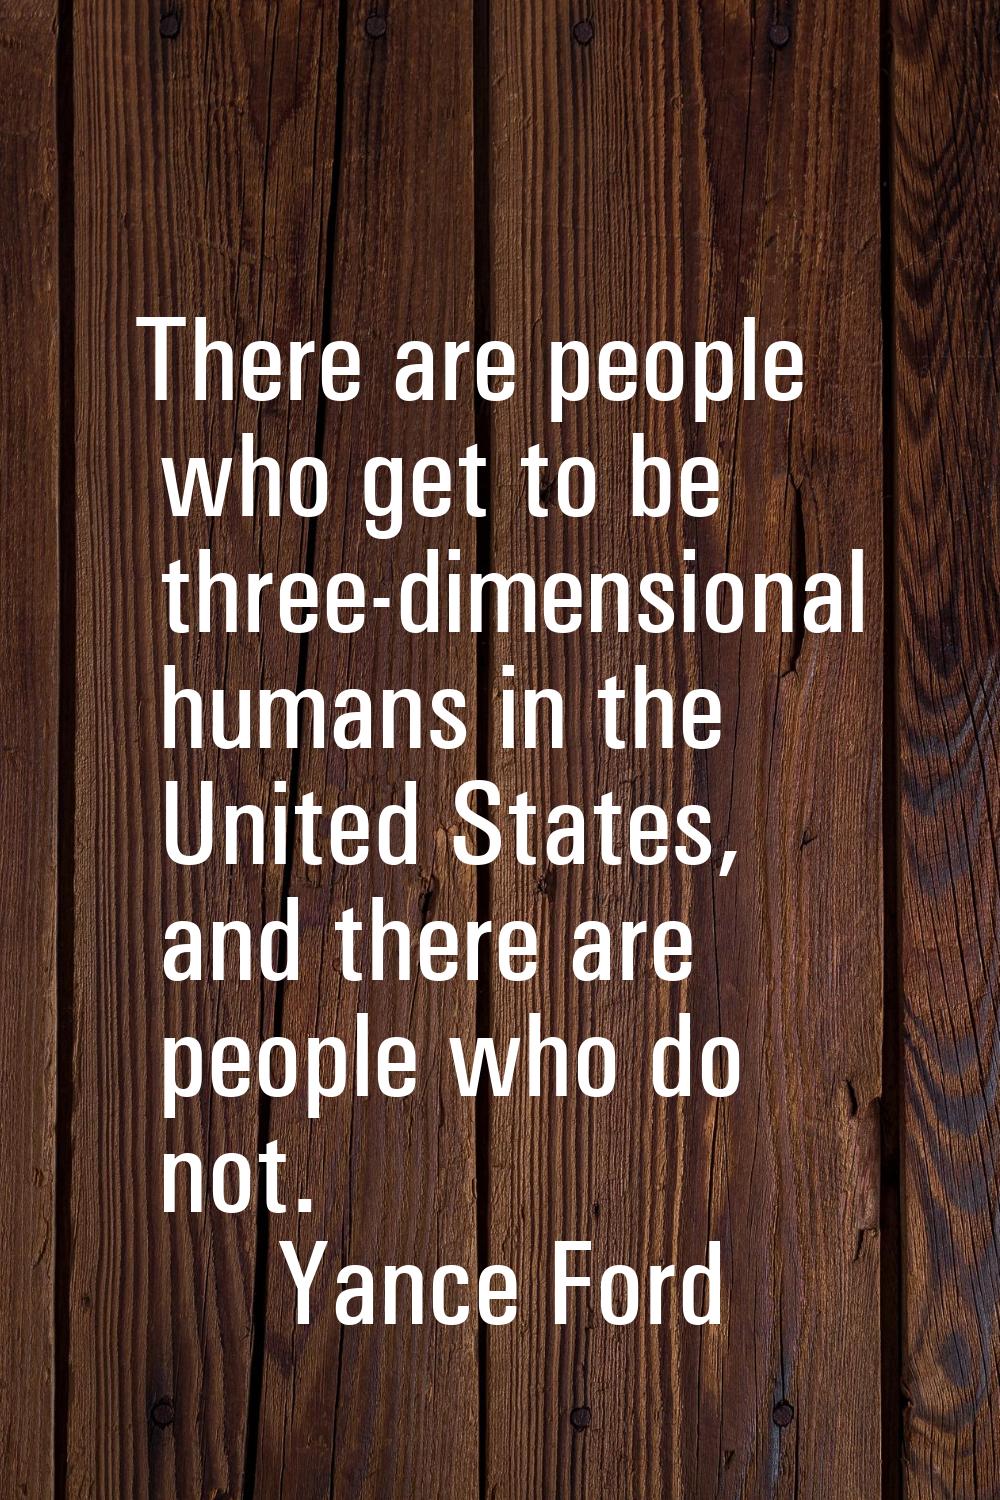 There are people who get to be three-dimensional humans in the United States, and there are people 